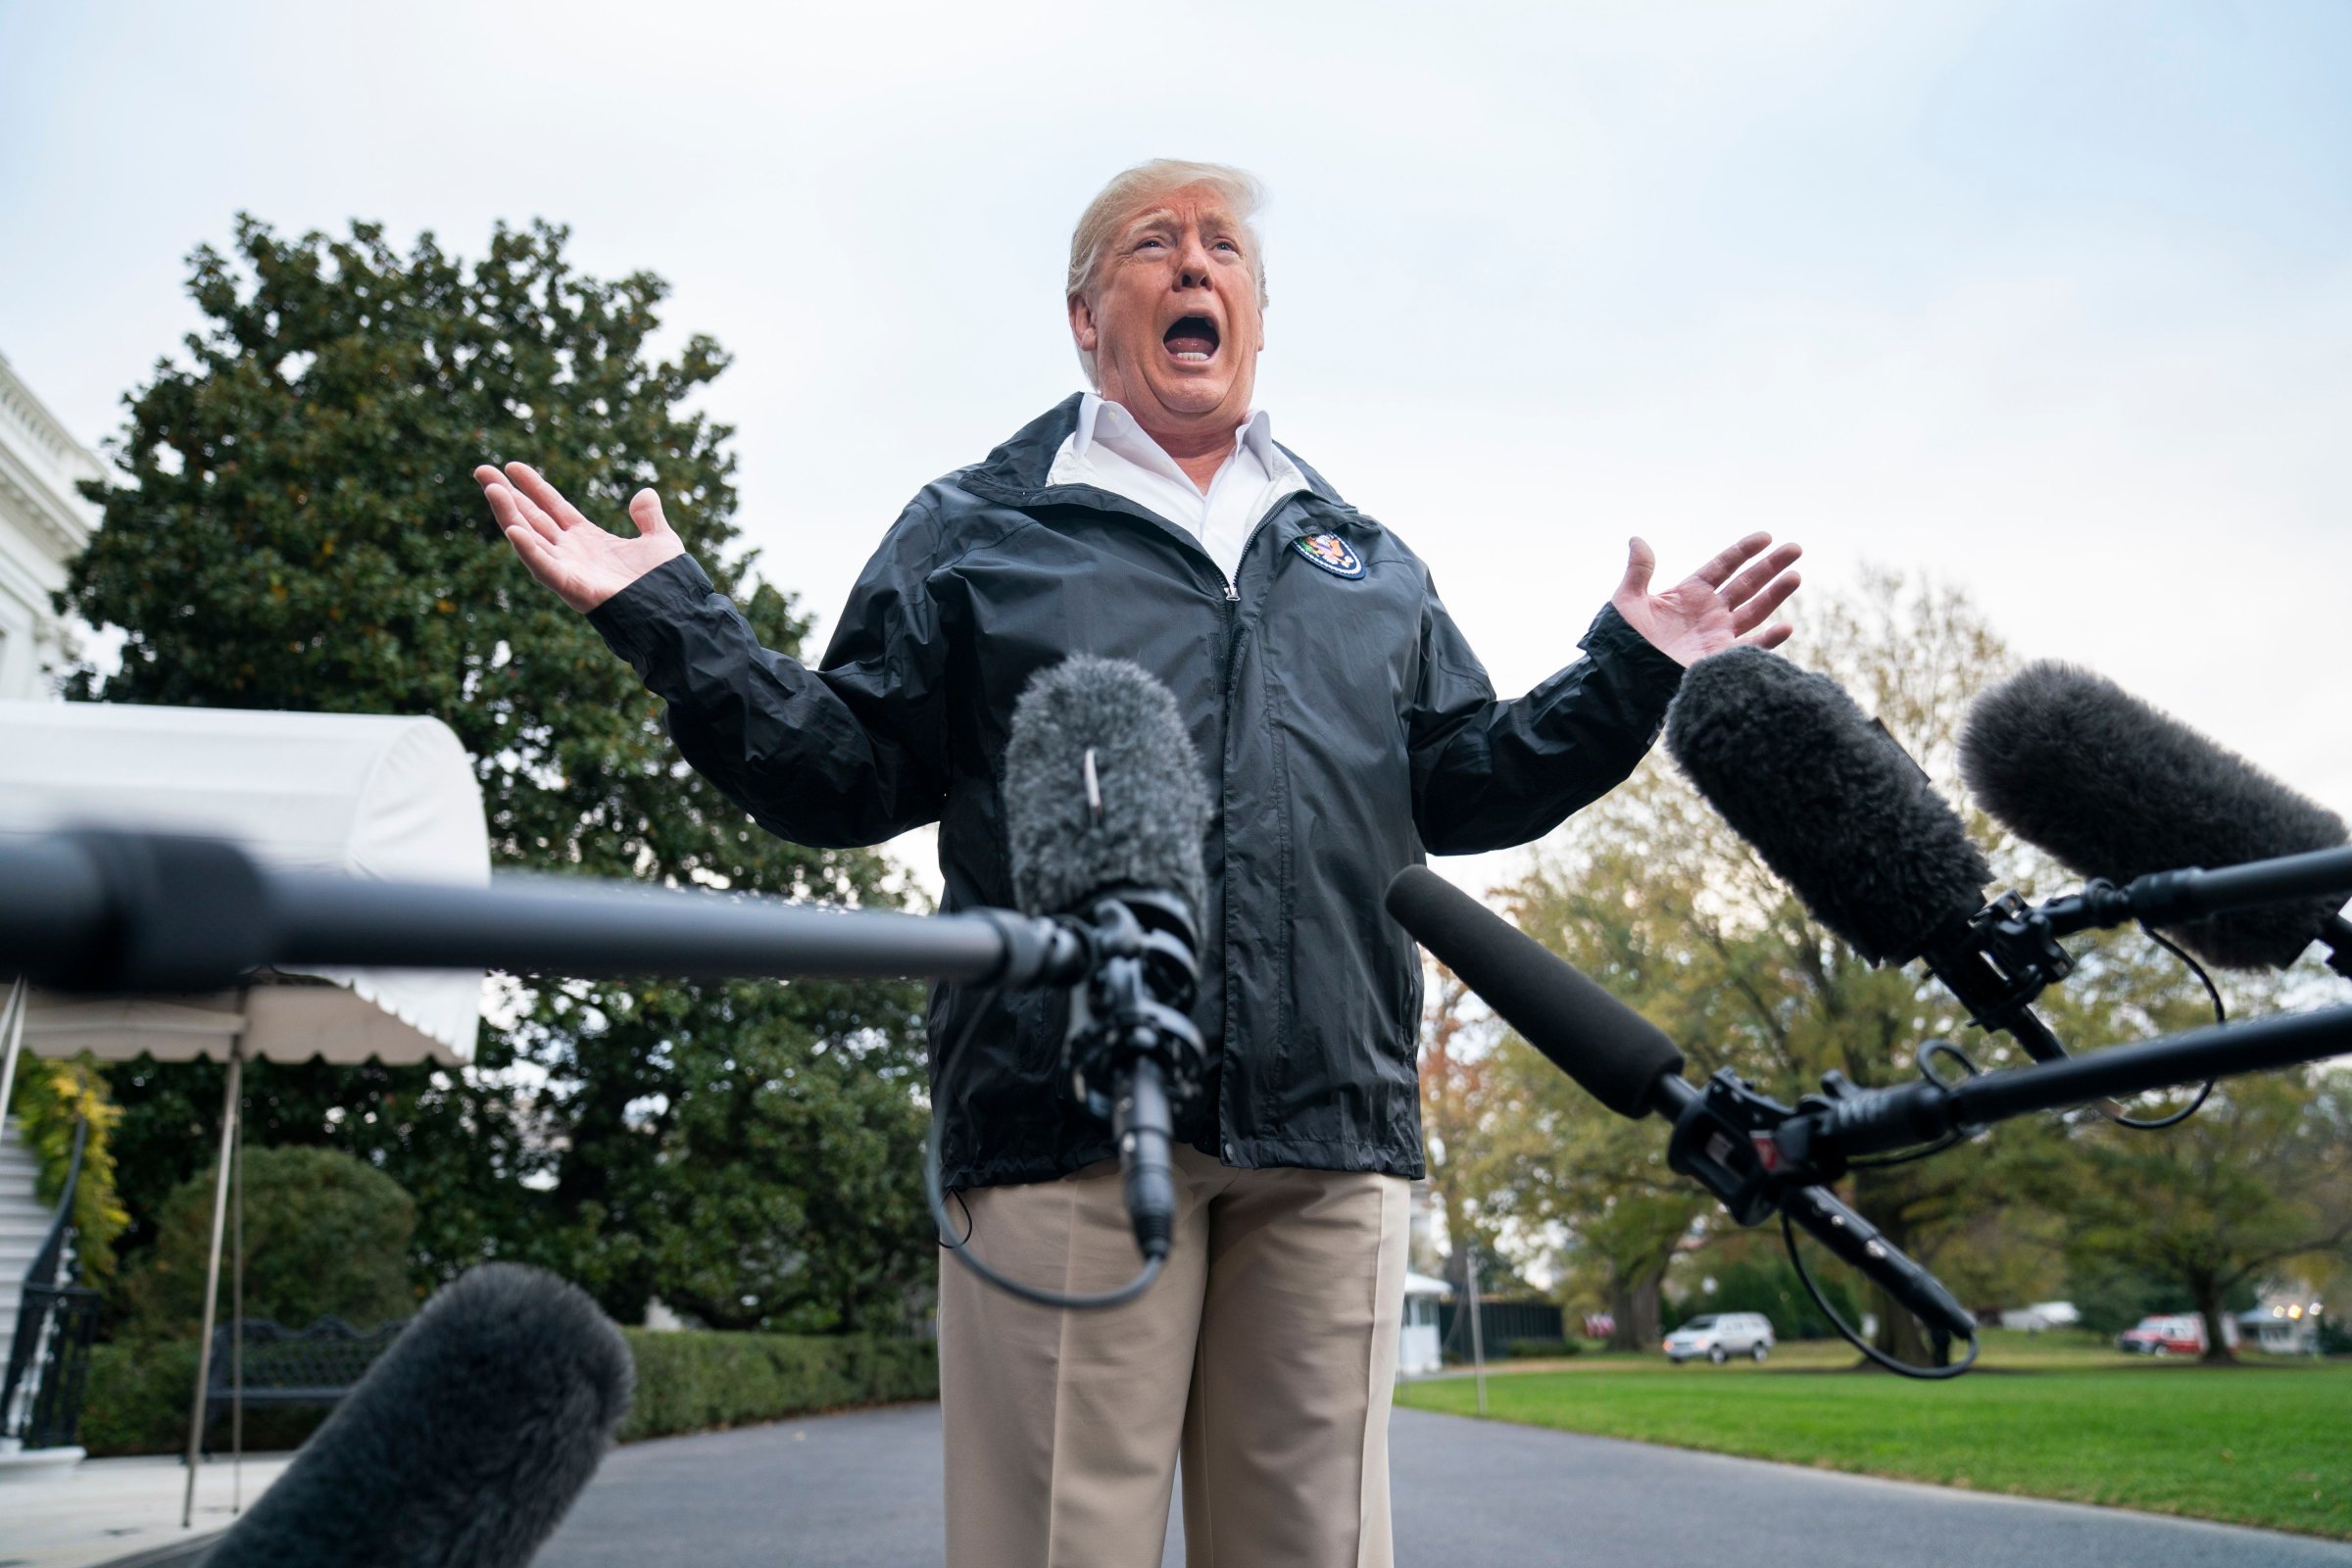 Trump speaks before departing White House to view wildfire damage in California, Washington, USA - 17 Nov 2018